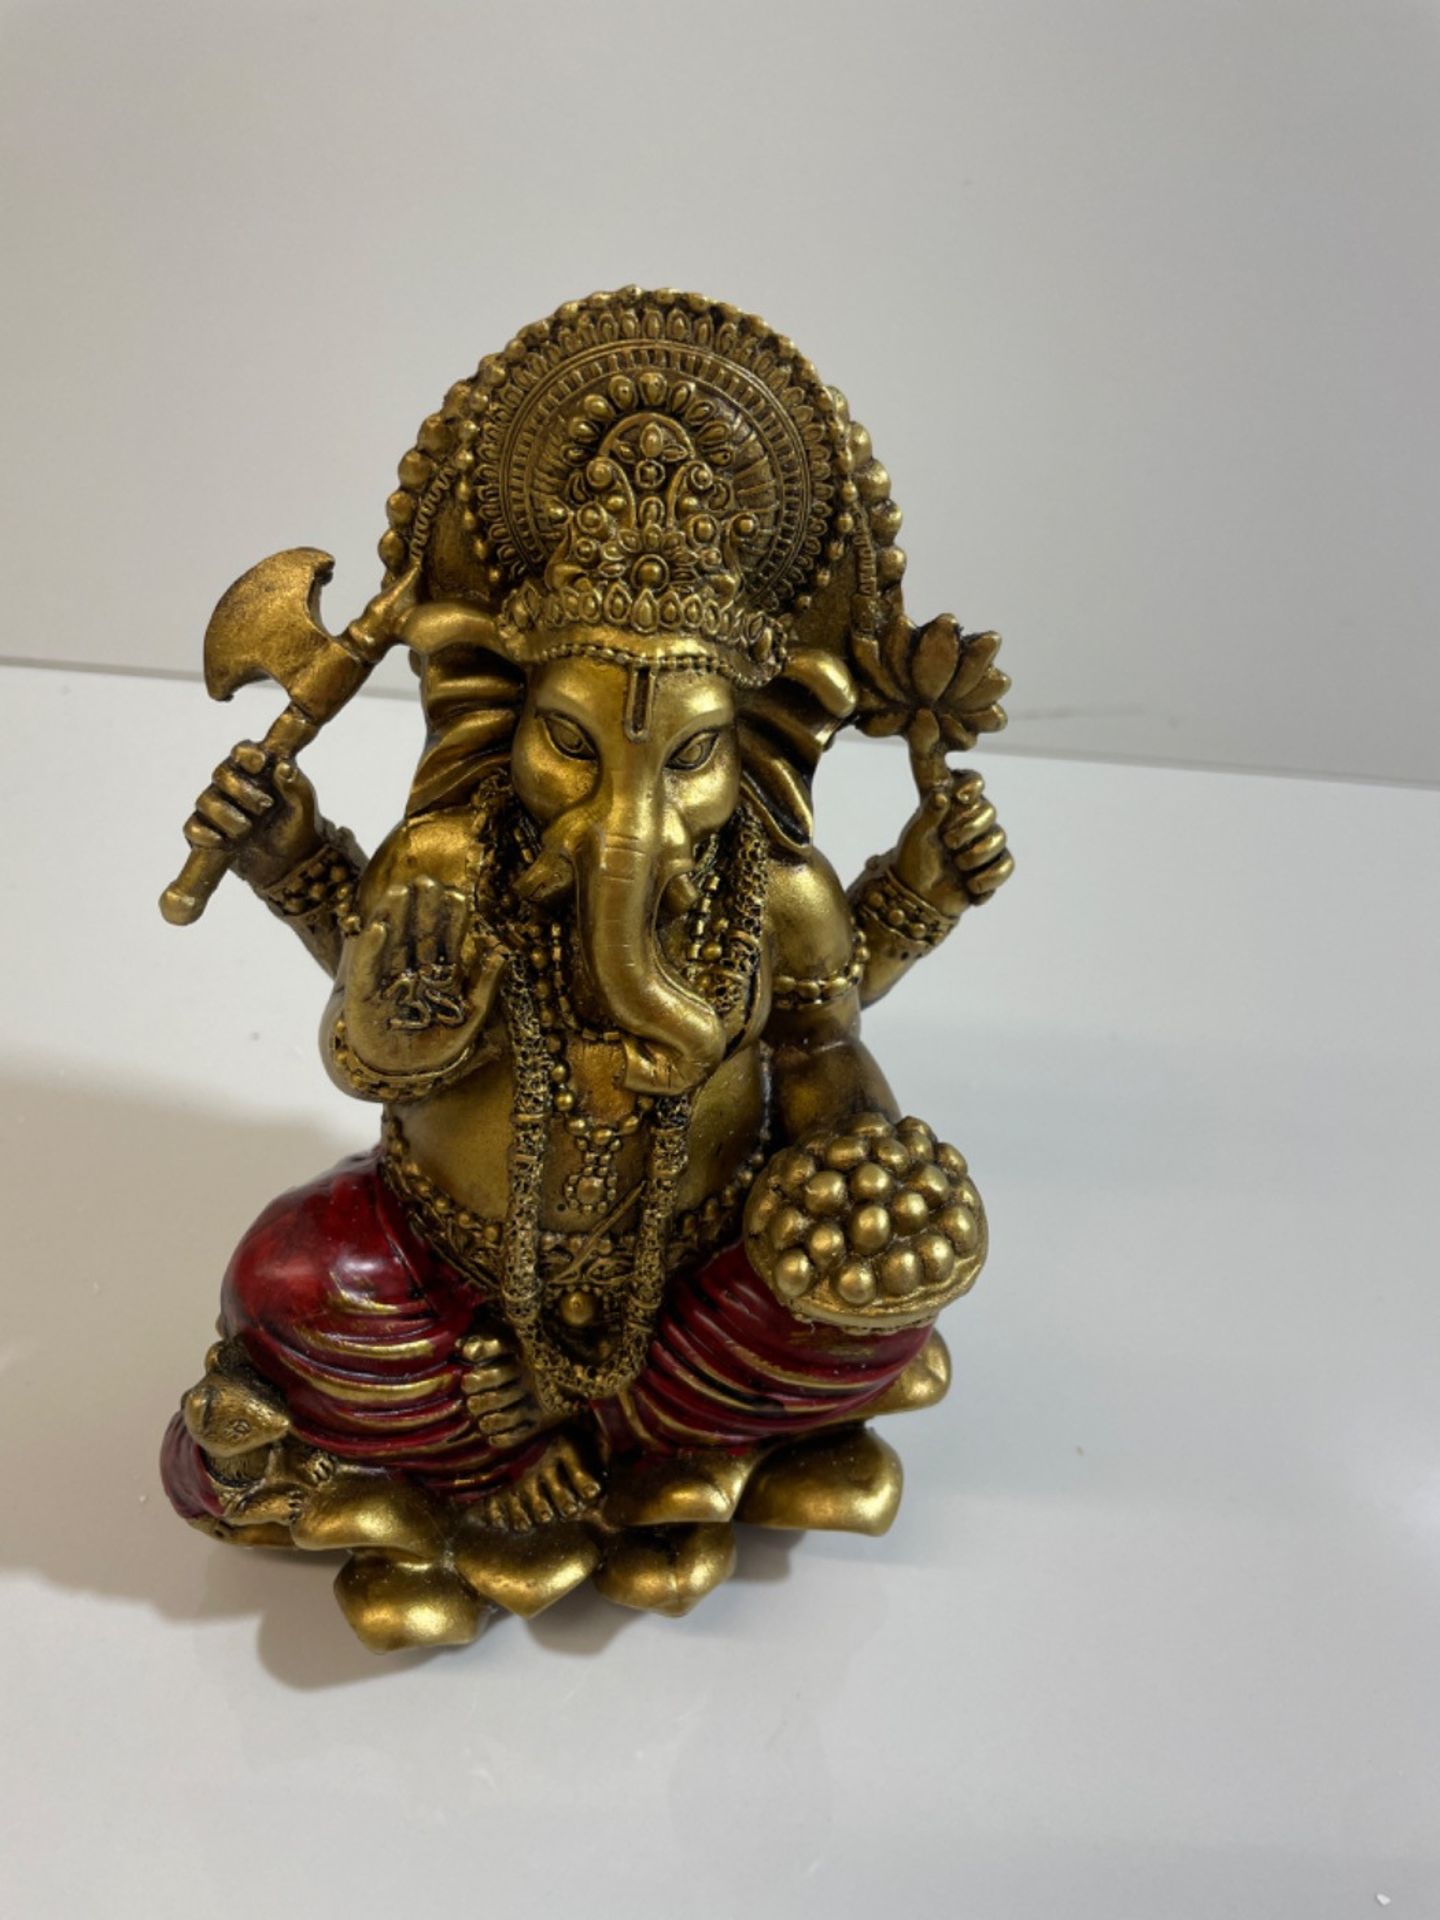 Gold and Red Ganesh Statue 16cm - Image 2 of 3